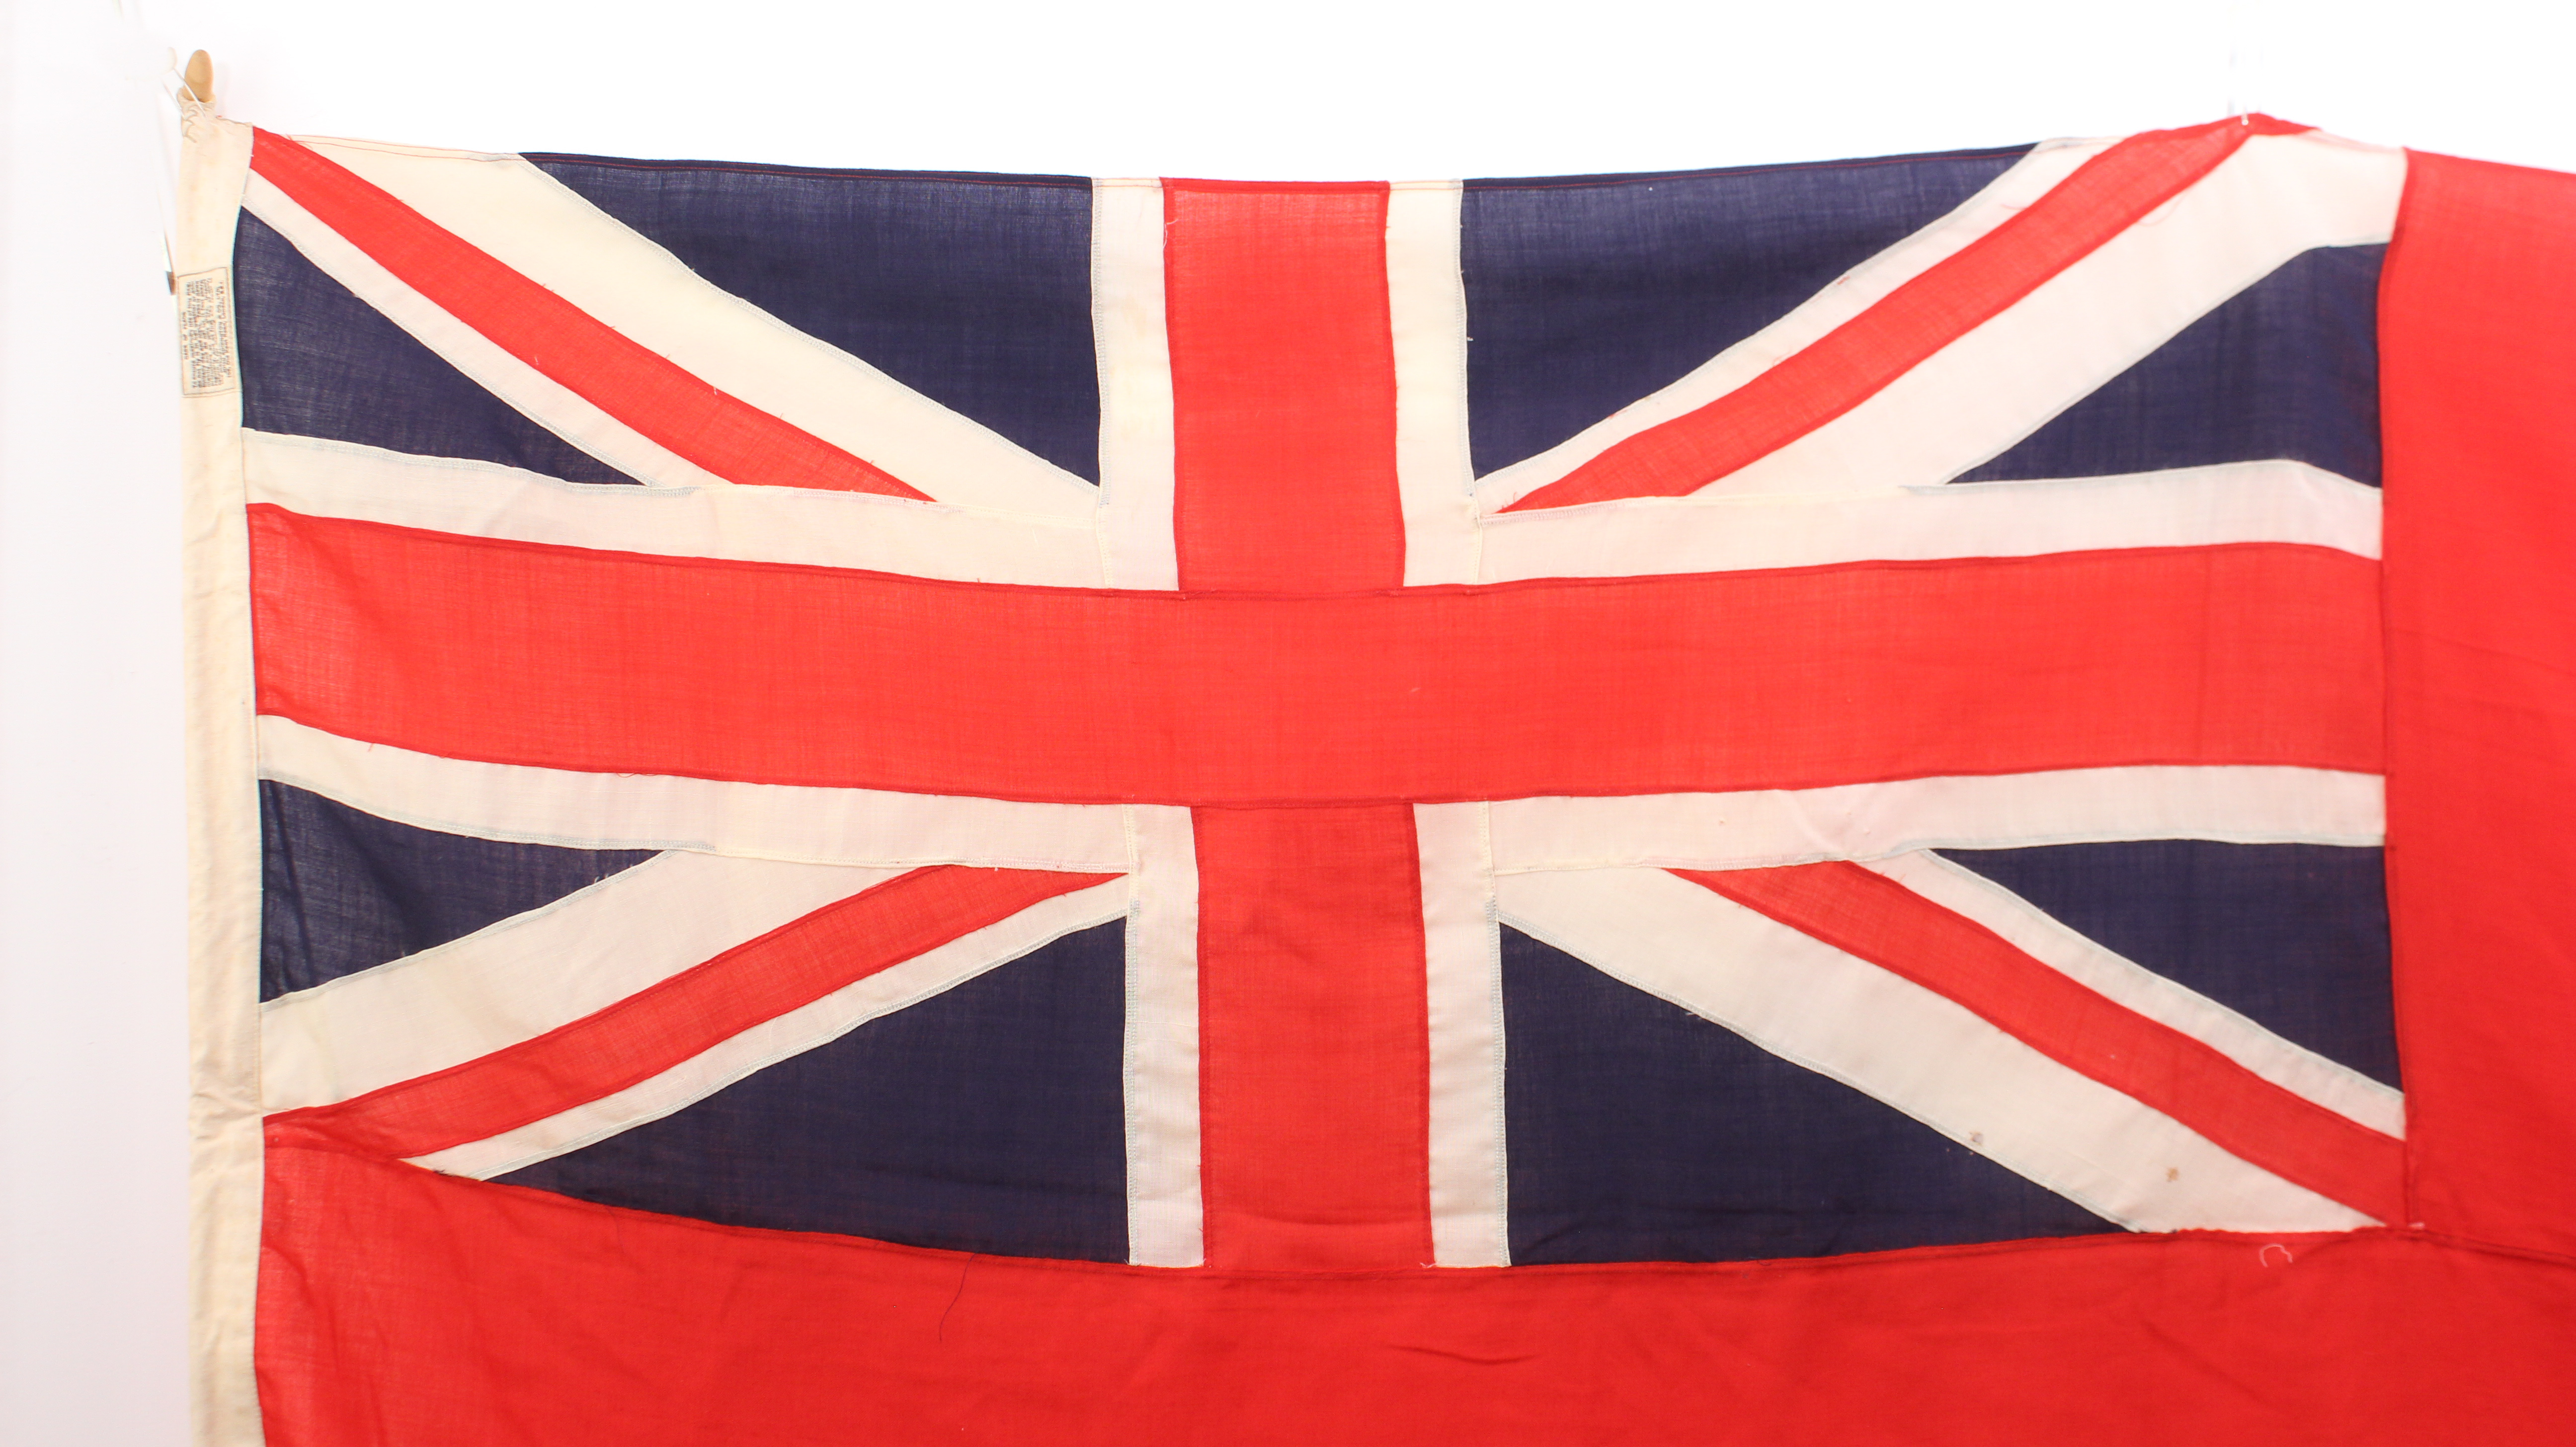 A vintage red ensign flag by John Edgington & Co., 108 Old Kent Road, London - 1930s-50s, 108 x 52 - Image 2 of 2